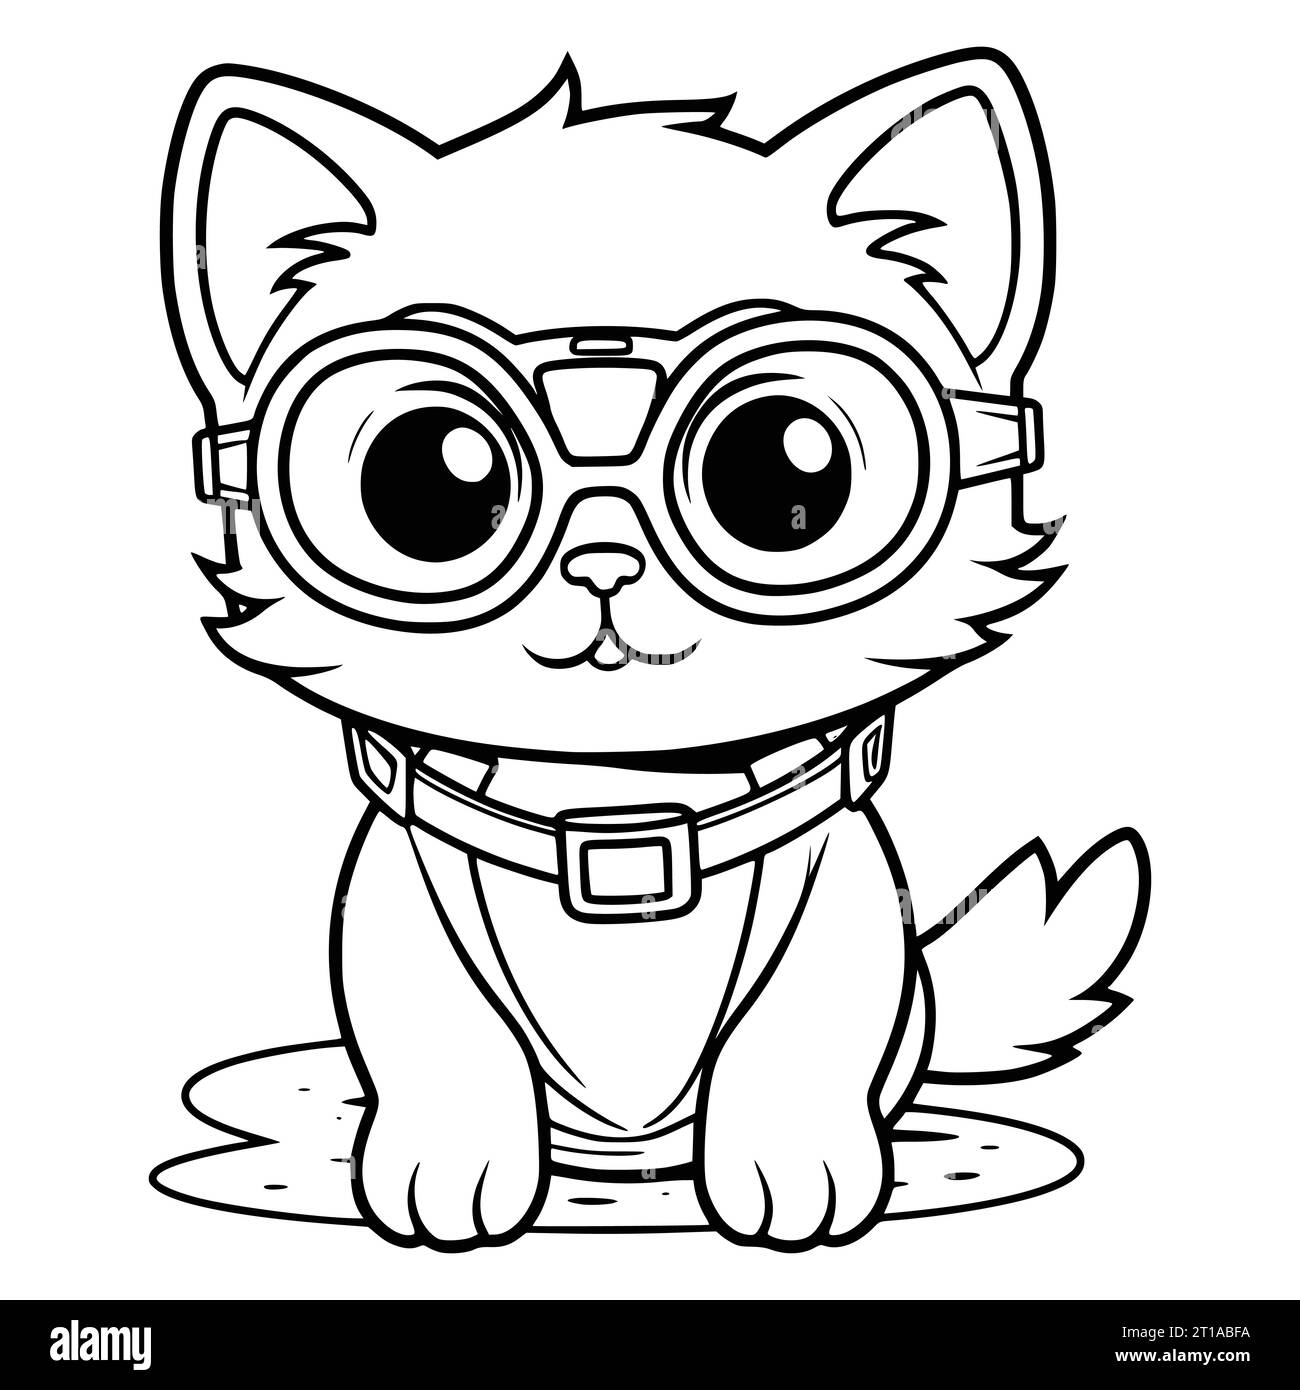 Free Simple Colouring Pages For Toddlers, Download Free Simple Colouring  Pages For Toddlers png images, Free ClipArts on Clipart Library